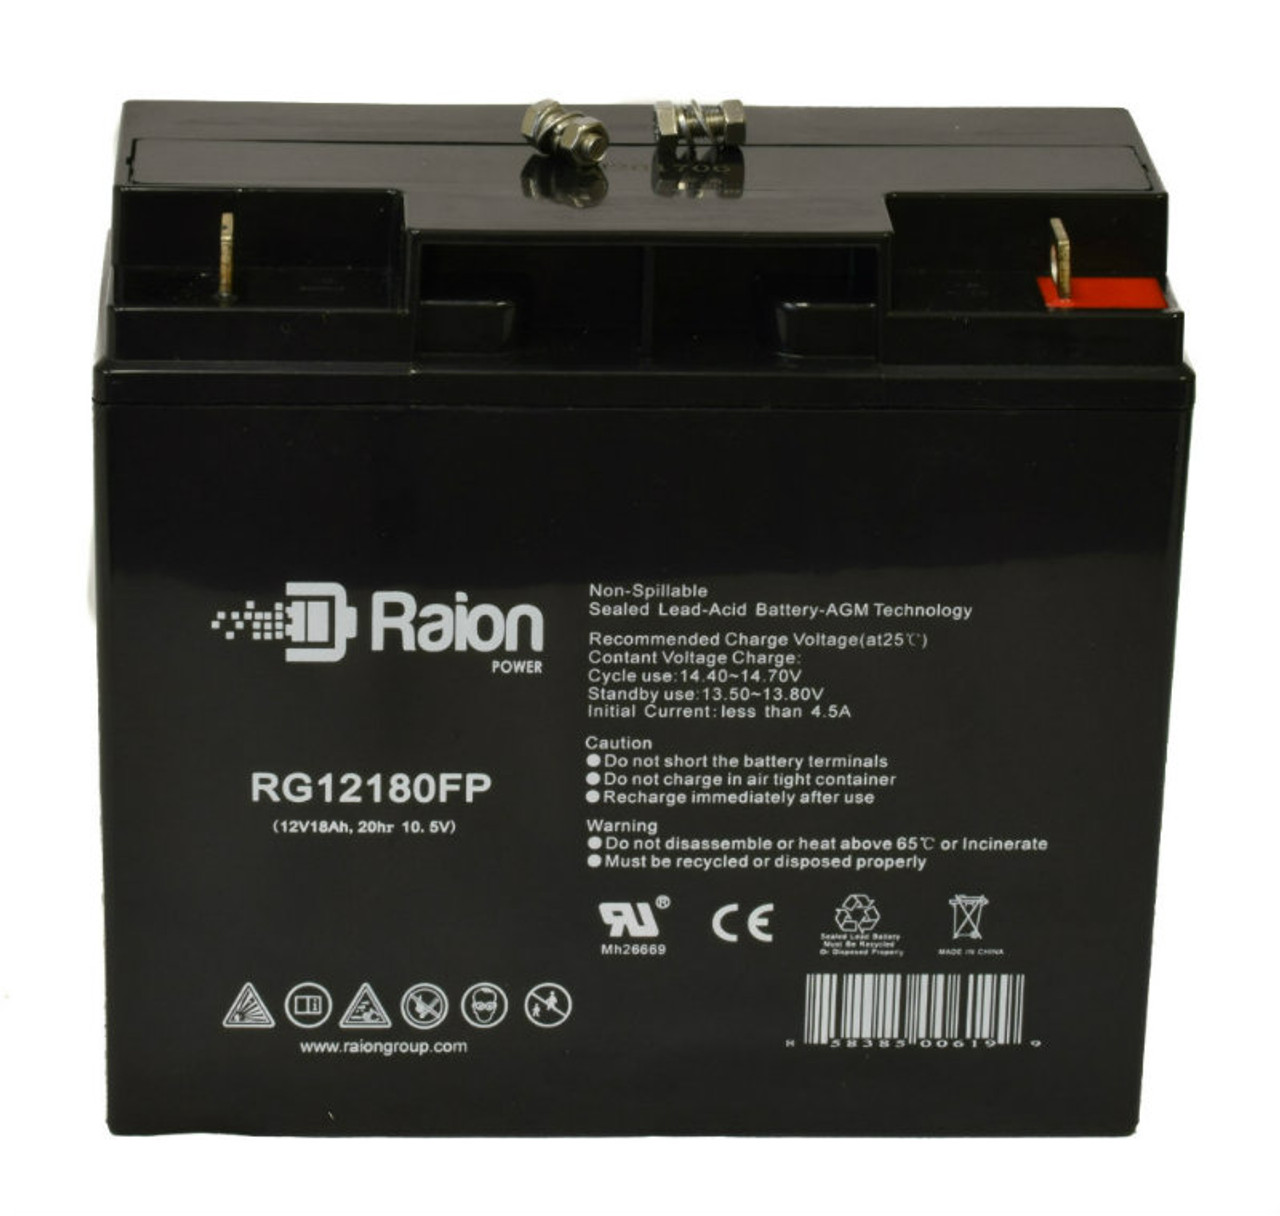 Raion Power RG12180FP 12V 18Ah Lead Acid Battery for Ecolo ET-4-Classic with Roof